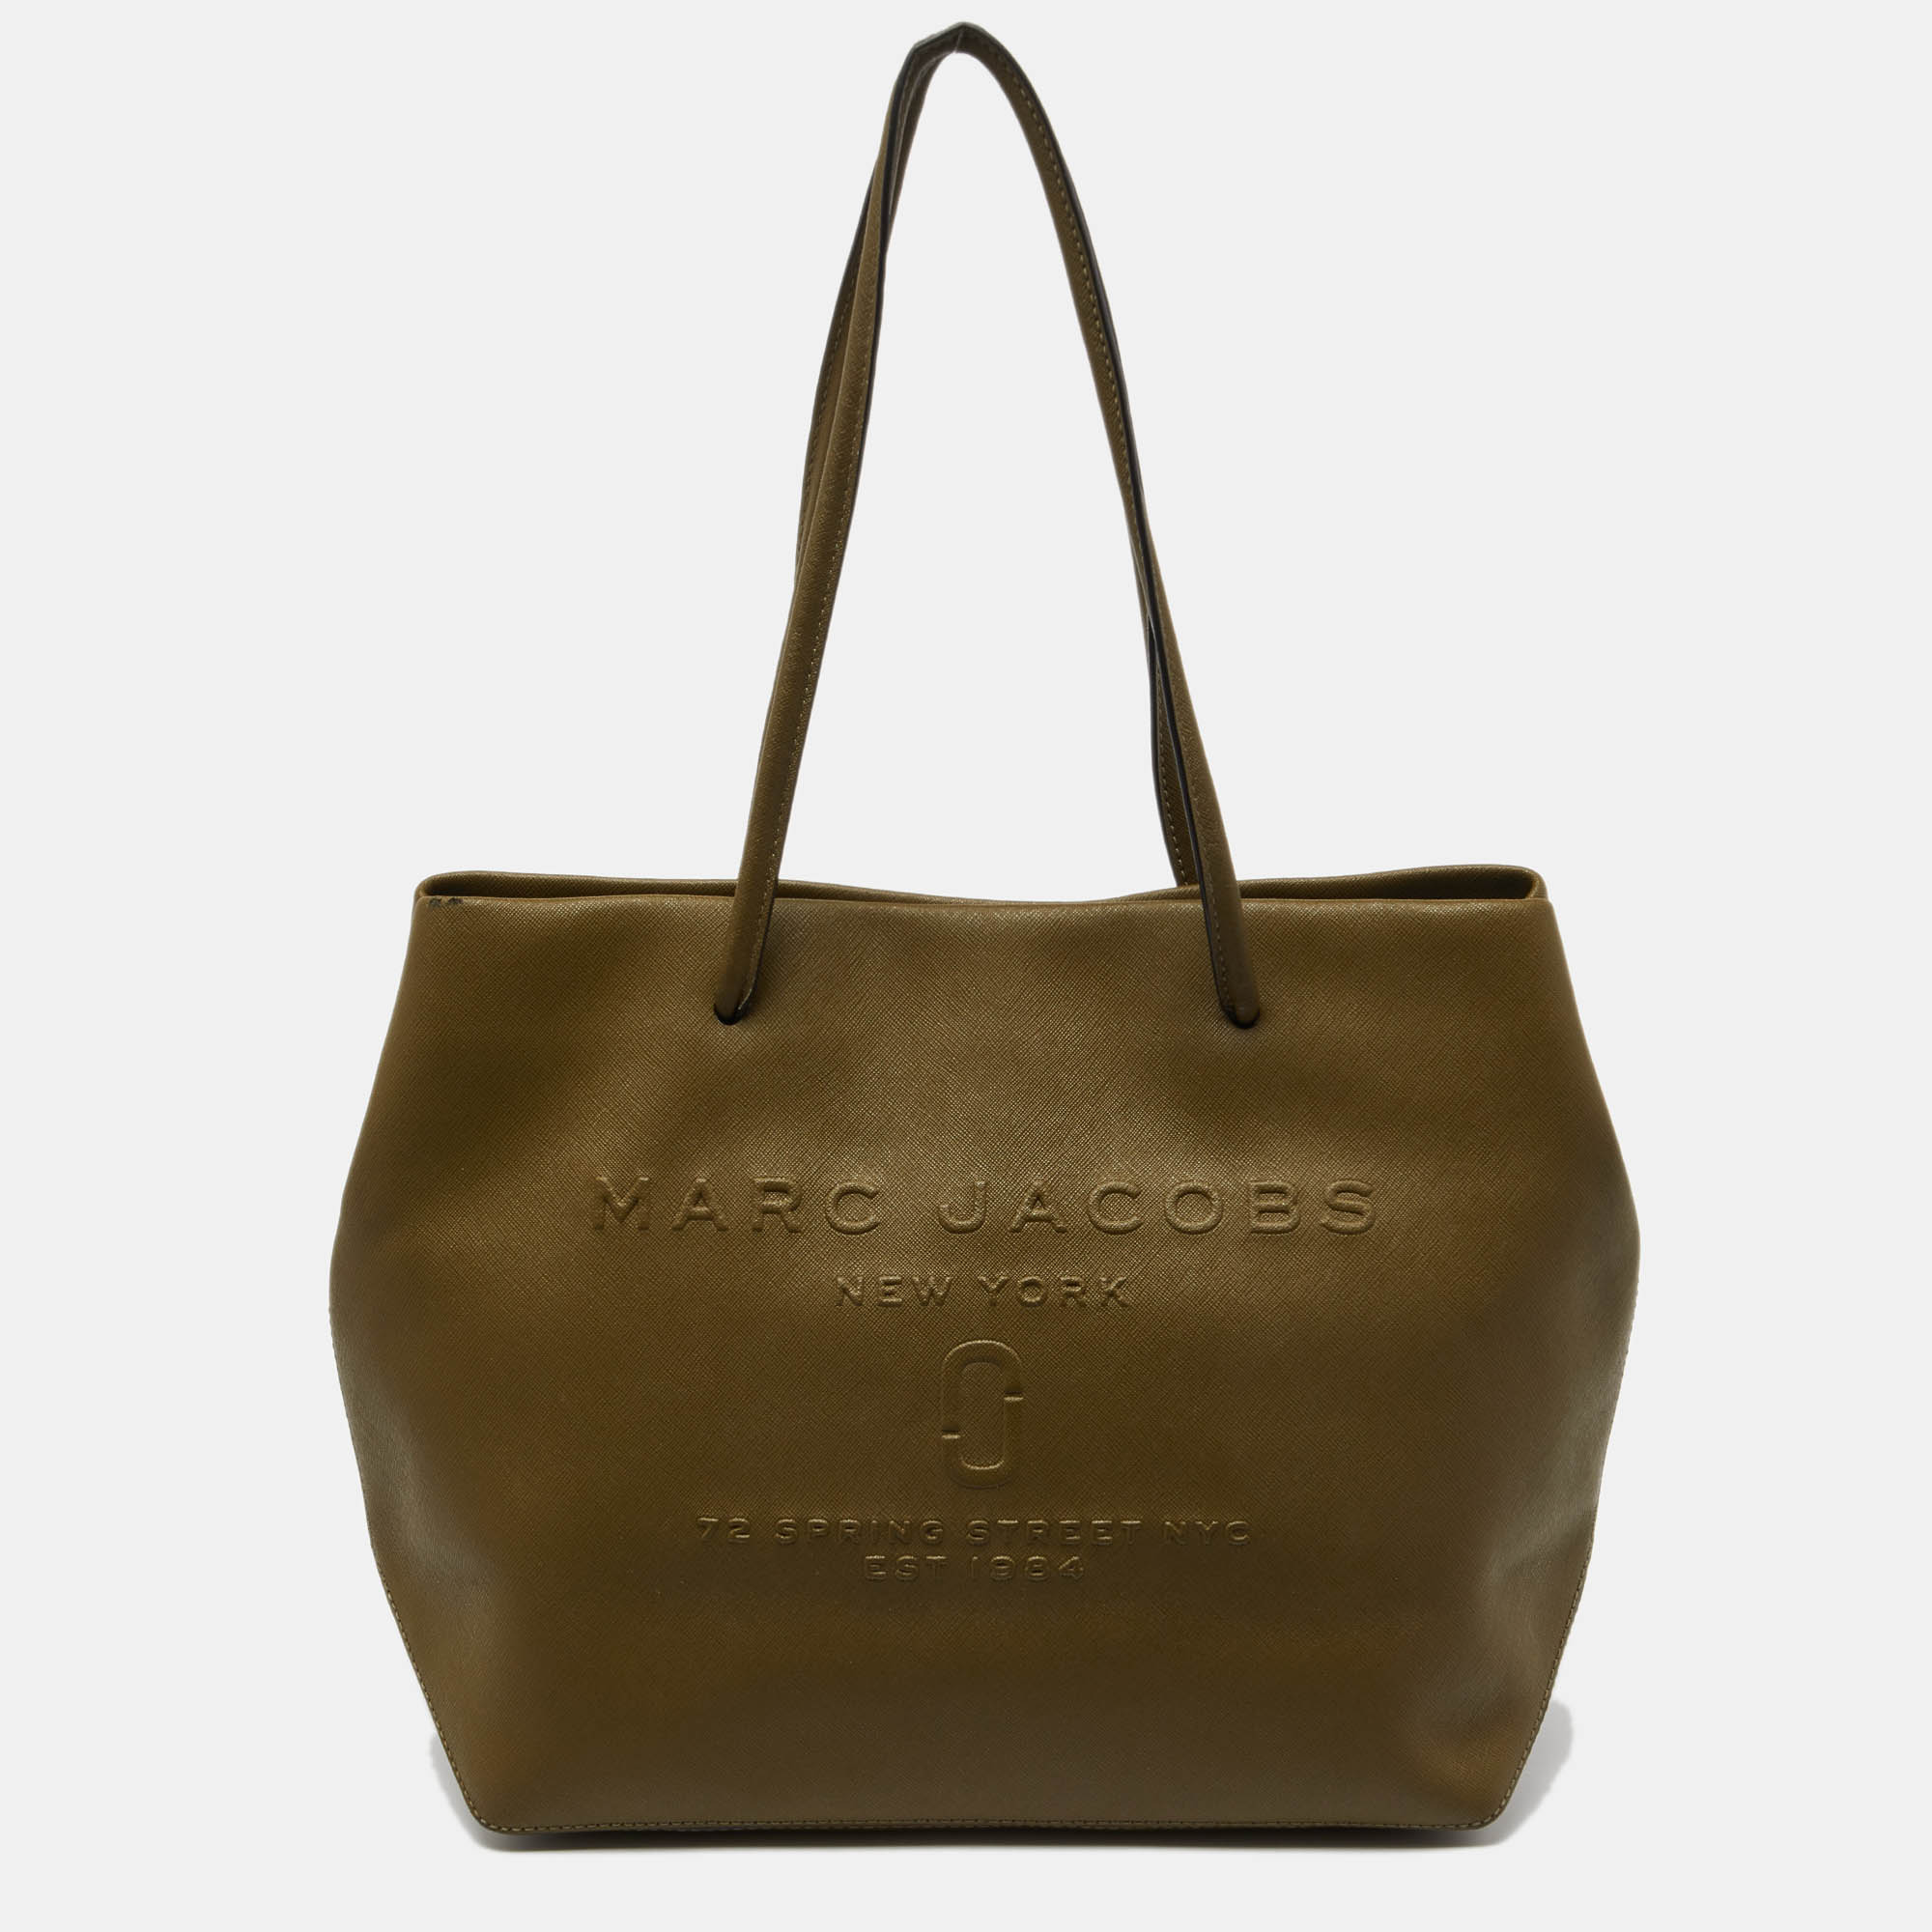 Marc jacobs green leather east west shopper tote